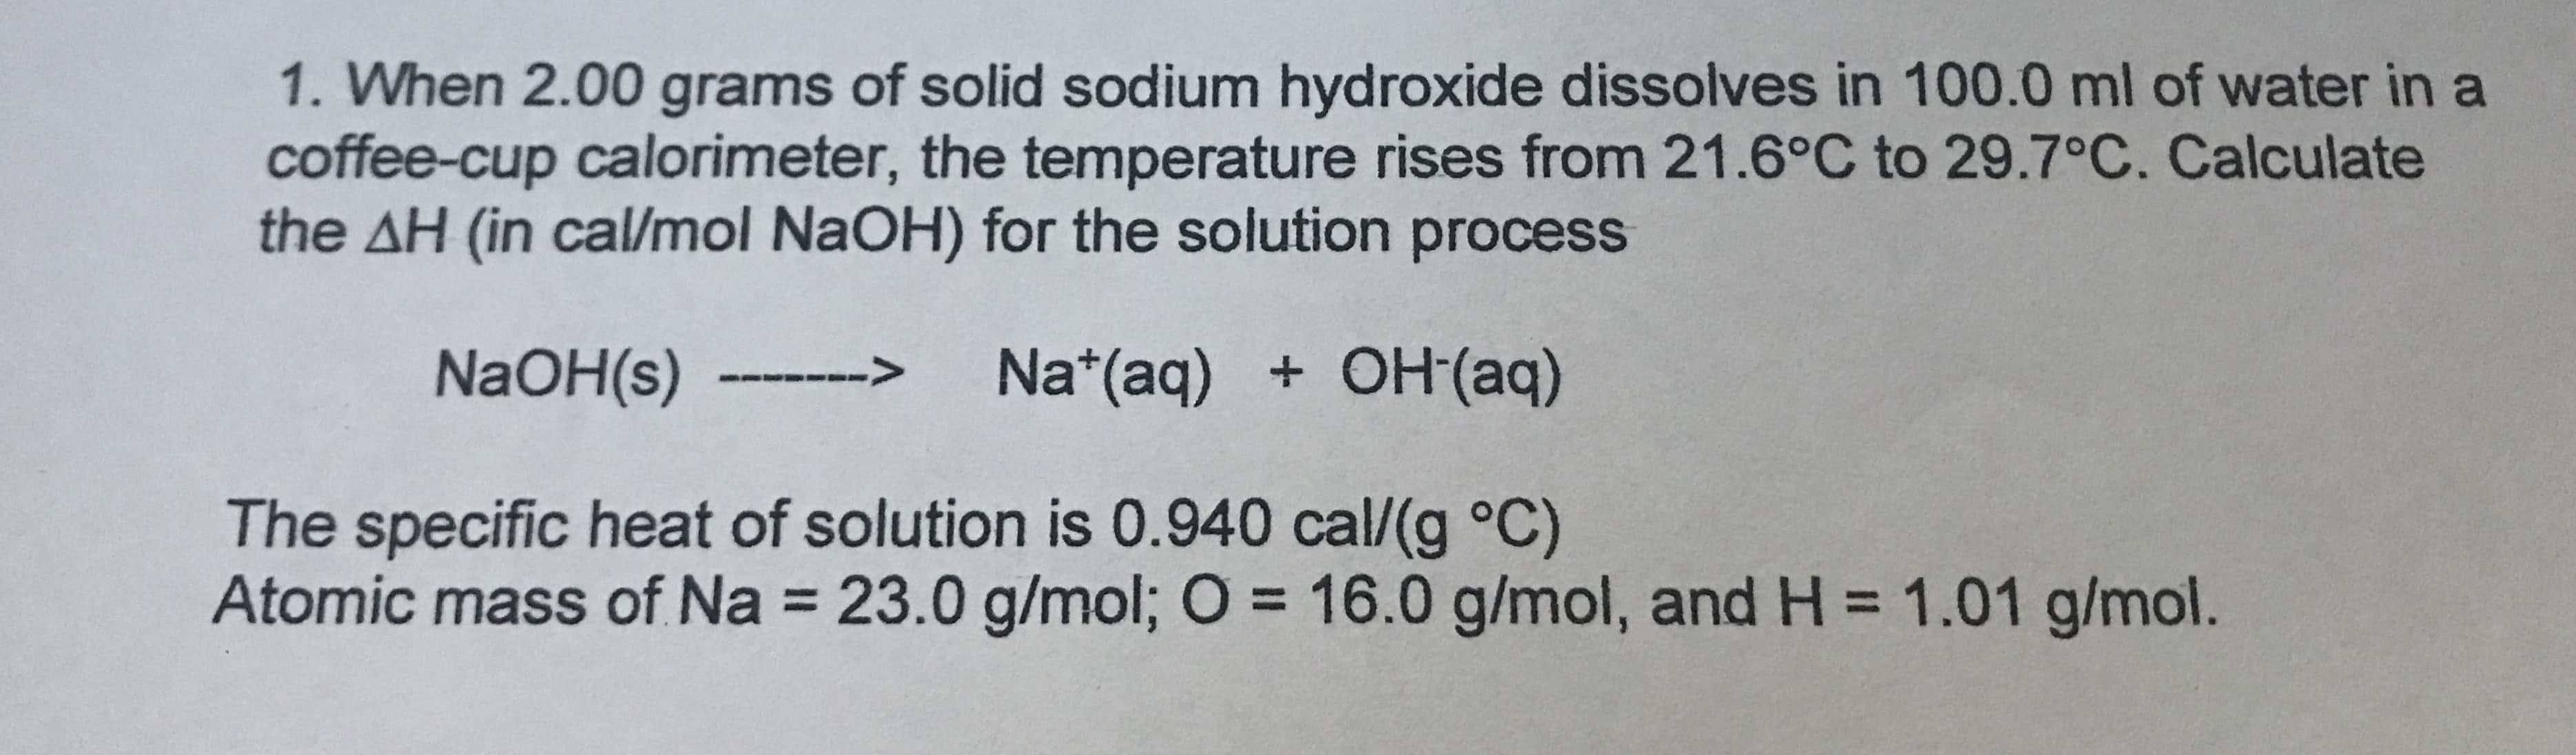 1. When 2.00 grams of solid sodium hydroxide dissolves in 100.0 ml of water in a
coffee-cup calorimeter, the temperature rises from 21.6°C to 29.7°C. Calculate
the AH (in cal/mol NaOH) for the solution process
Na (aq) OH(aq)
>
NaOH(s)
The specific heat of solution is 0.940 cal/(g °C)
Atomic mass of Na 23.0 g/mol; O 16.0 g/mol, and H 1.01 g/mol.
